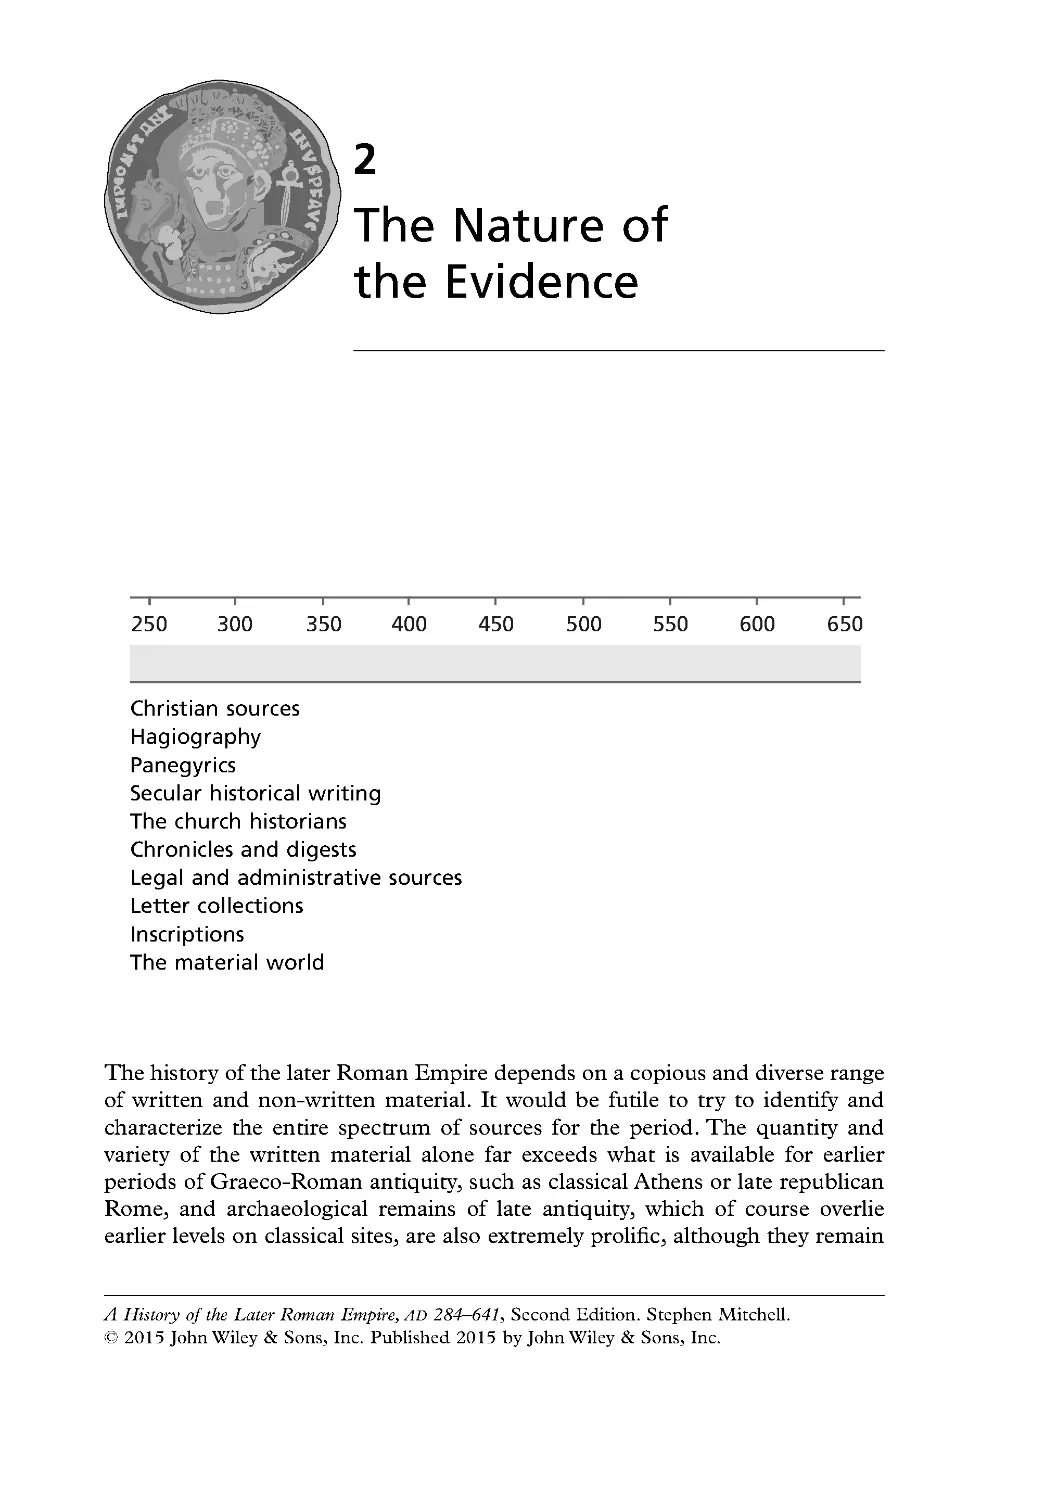 2: The Nature of the Evidence